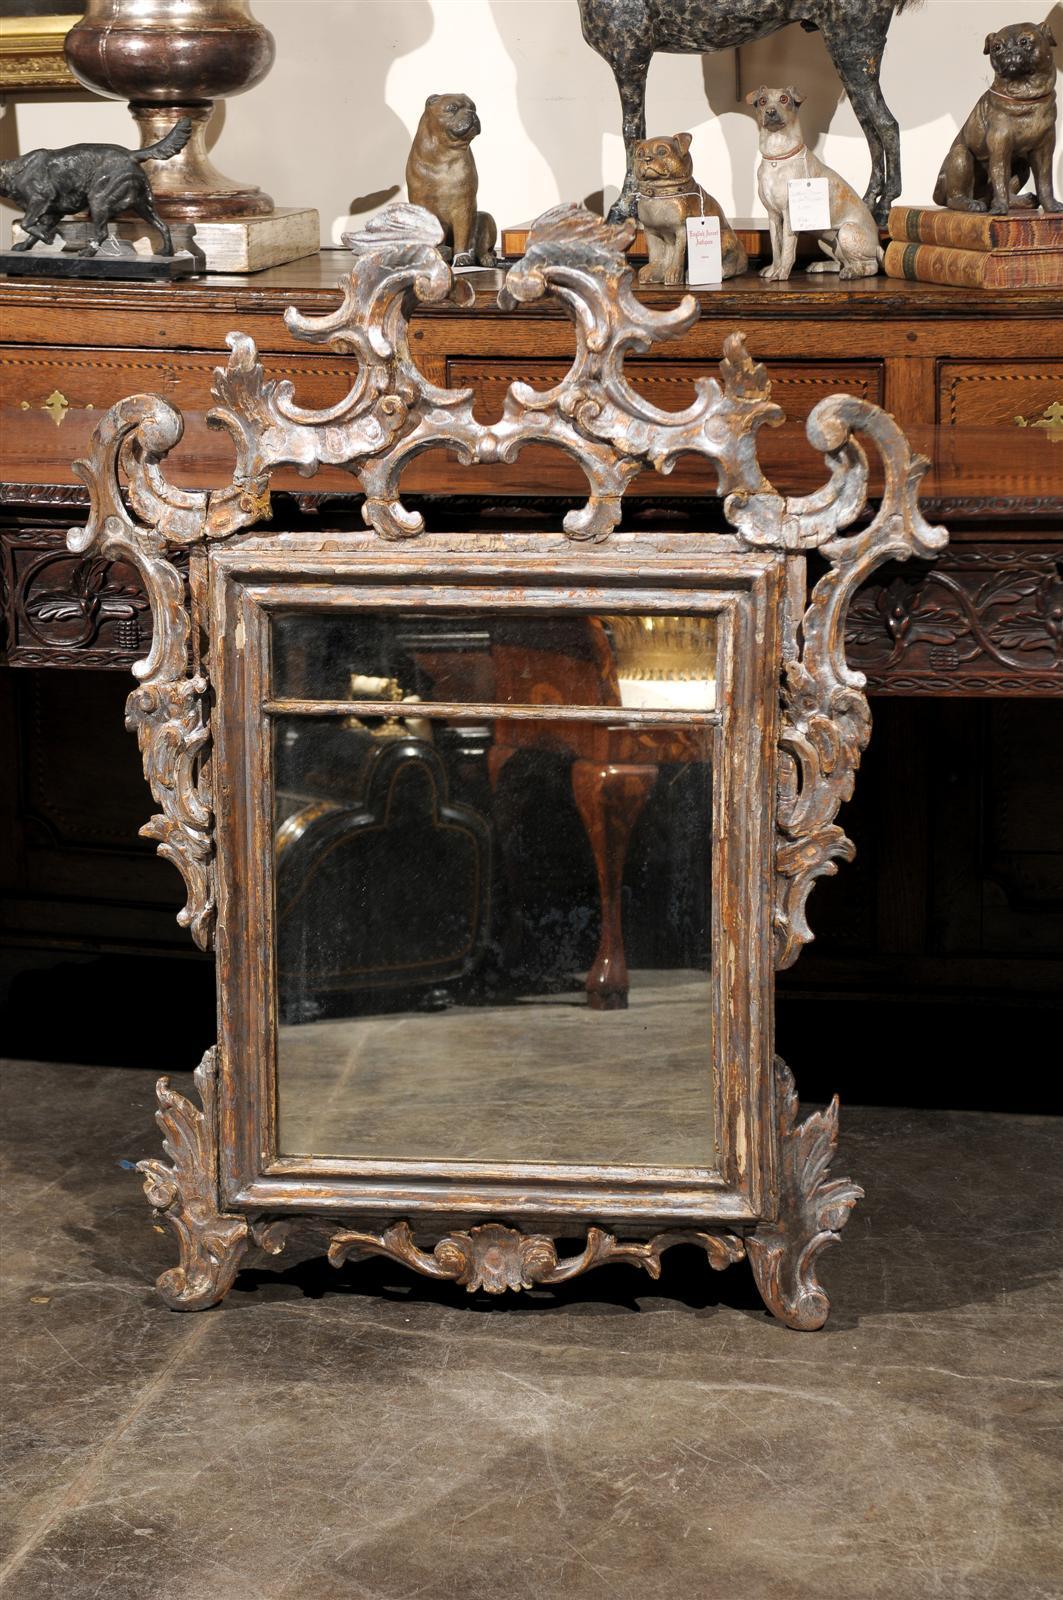 This Italian wooden mirror from the early 19th century features a Rococo style frame. The richly carved crest is made of an exquisitely refined arrangement of C-scrolls, placed symmetrically on either side of an invisible central line. The frame has